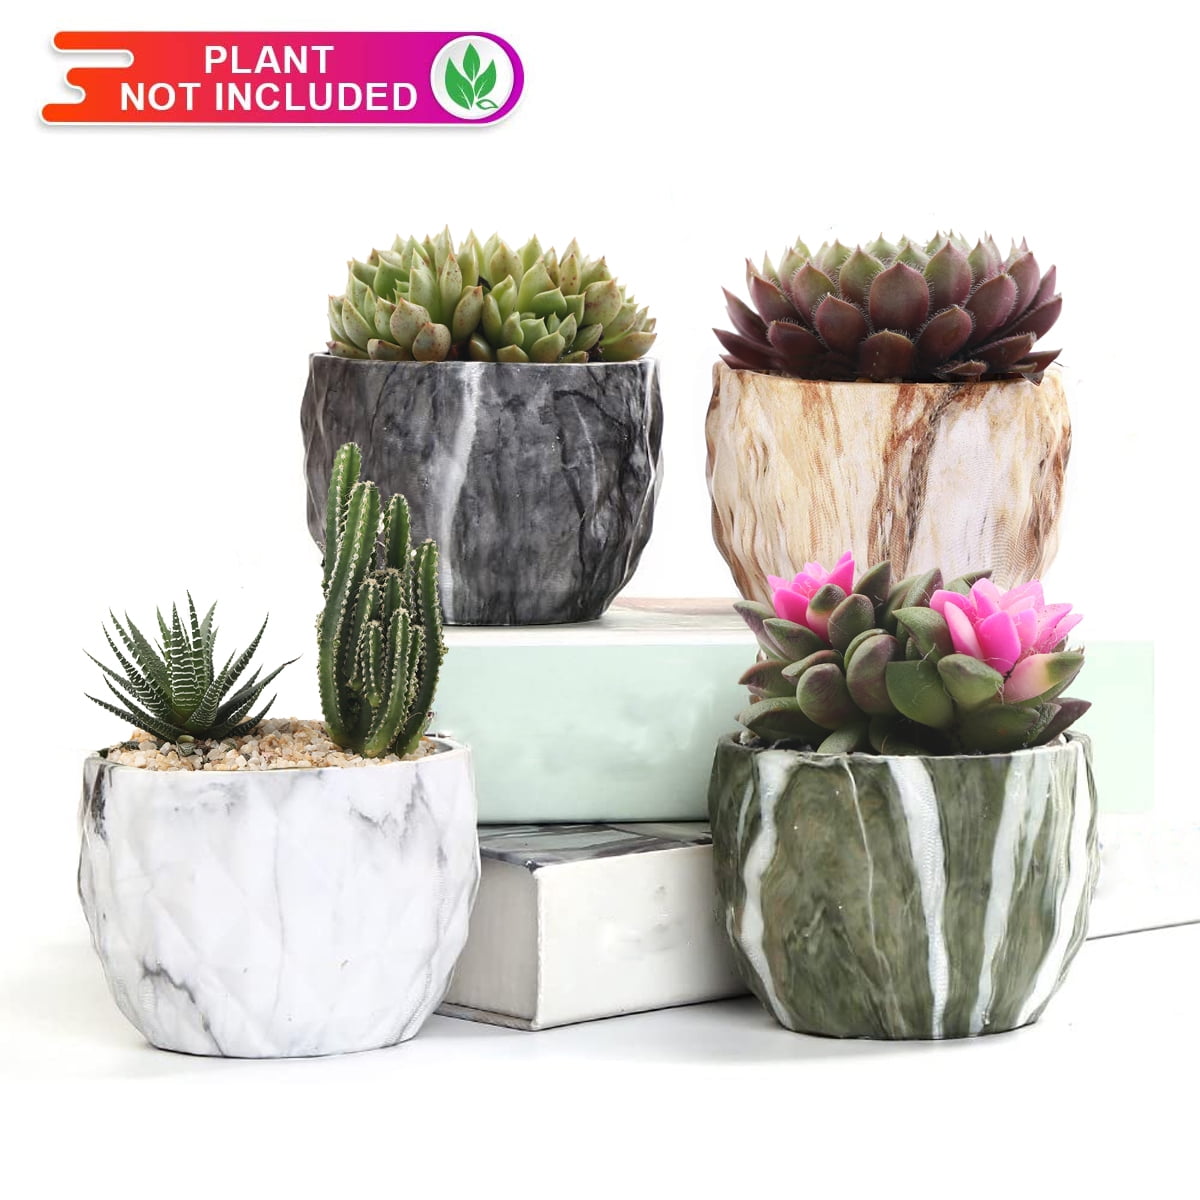 Ceramic Animal Planter A Set of 4 Pieces is Suitable as A Gift Indoor Plant Pots Cute Cactus/Bonsai Small Flower Pots for Home Decor and Office Desk Decoration Small Succulent Pots with Drainage 